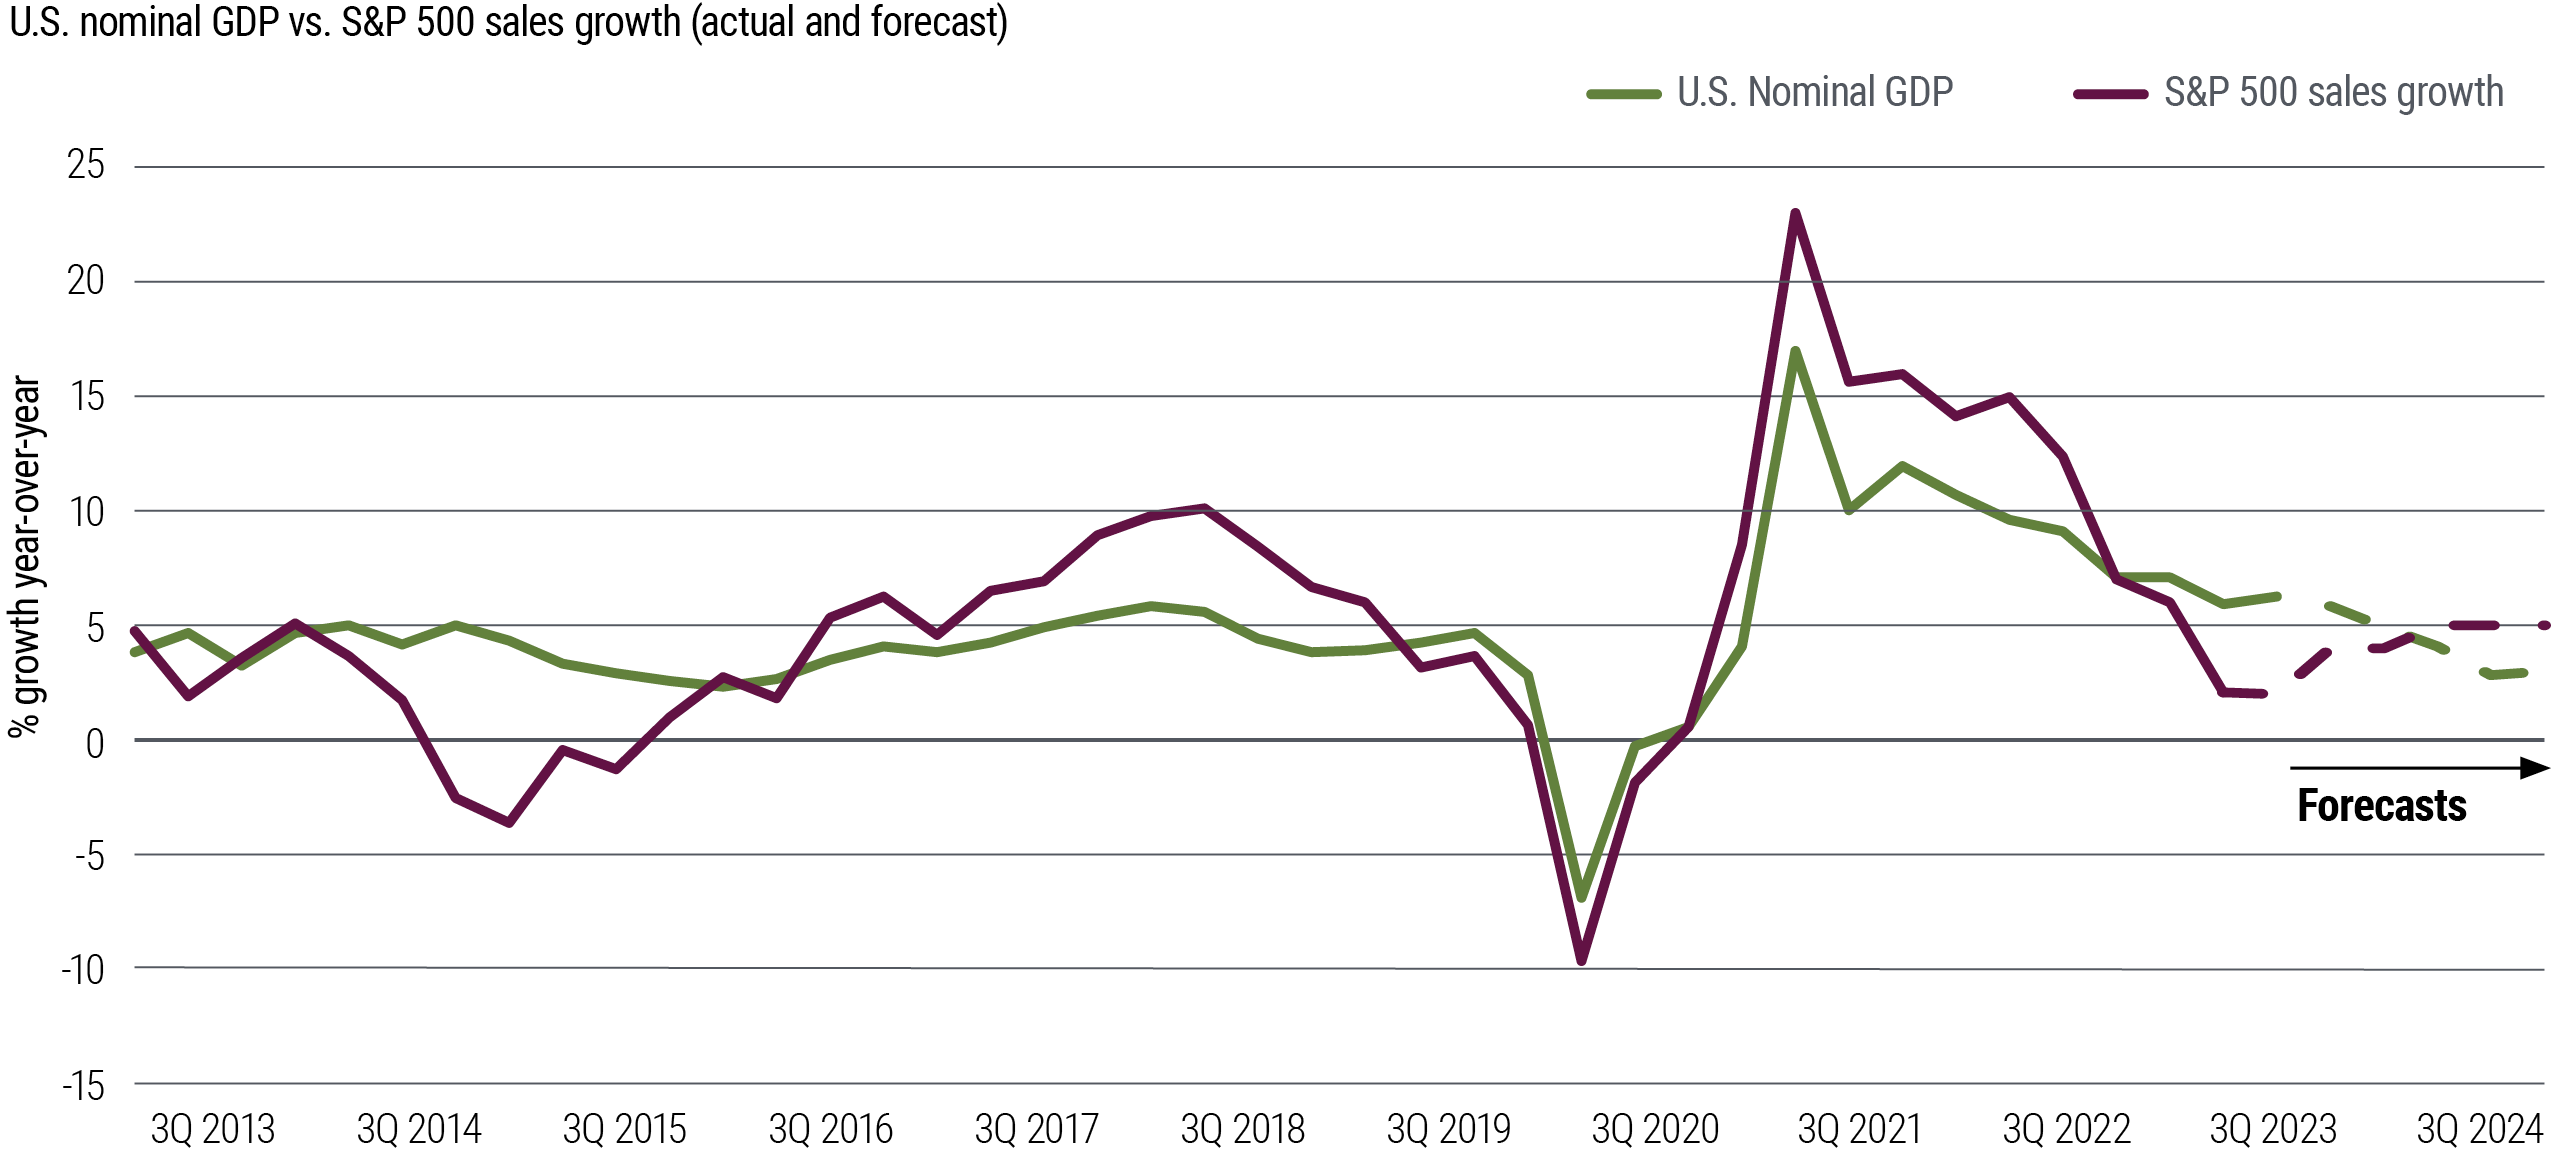 This is a line chart comparing U.S. nominal GDP and S&P 500 sales growth, including actual data since 3Q 2013 and forecasts through 2024. Both measures bottomed in 2020 amid the pandemic before recovering. Nominal GDP fell from a high of 17% in 2Q 2021 to 6% in 2Q 2023 before rising slightly in 3Q. PIMCO forecasts it to gradually diminish through much of 2024. Sales growth plunged from 23% in 2Q 2021 to 1% in 2Q 2023, and consensus forecasts see it rising from here and then plateauing later in 2024. Source: U.S. Bureau of Economic Analysis, Haver Analytics, Goldman Sachs, PIMCO as of October 2023. Nominal GDP forecasts are from PIMCO, while consensus sales forecasts for S&P 500 are from Goldman Sachs.